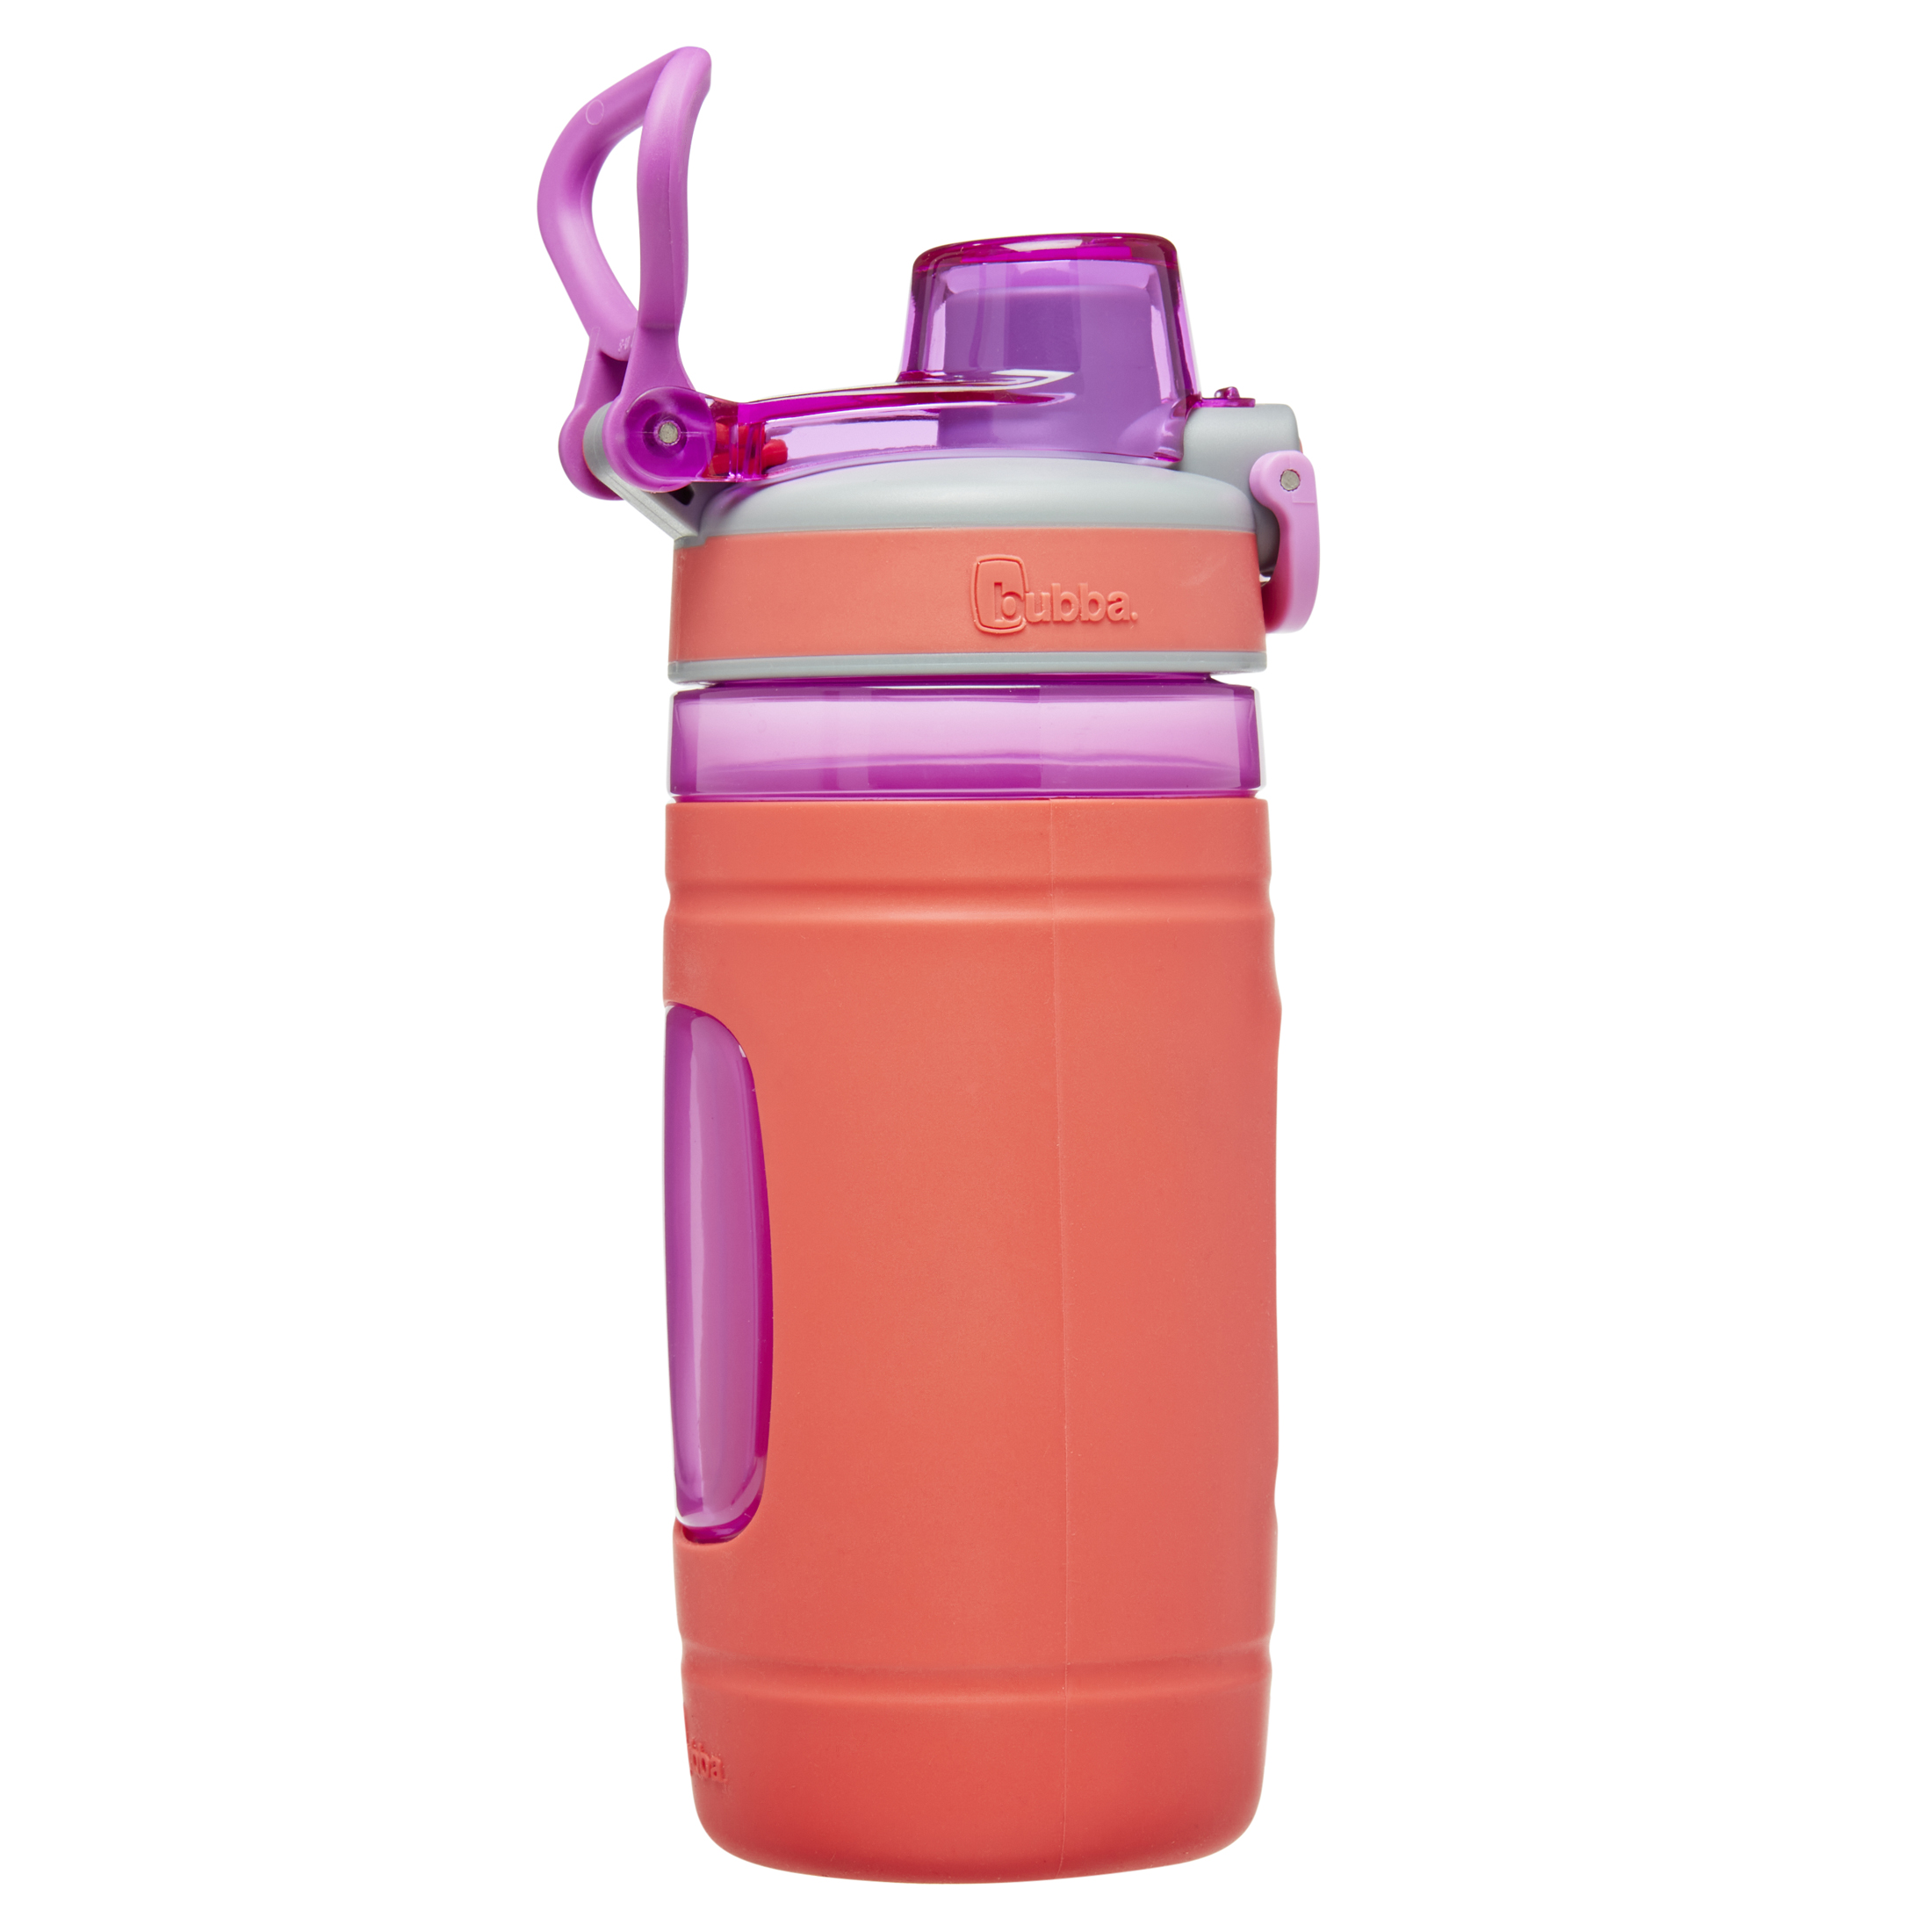 bubba Flo Kids Water Bottle Wide Mouth Lid with Silicone Sleeve Coral, 16 fl oz. - image 4 of 7